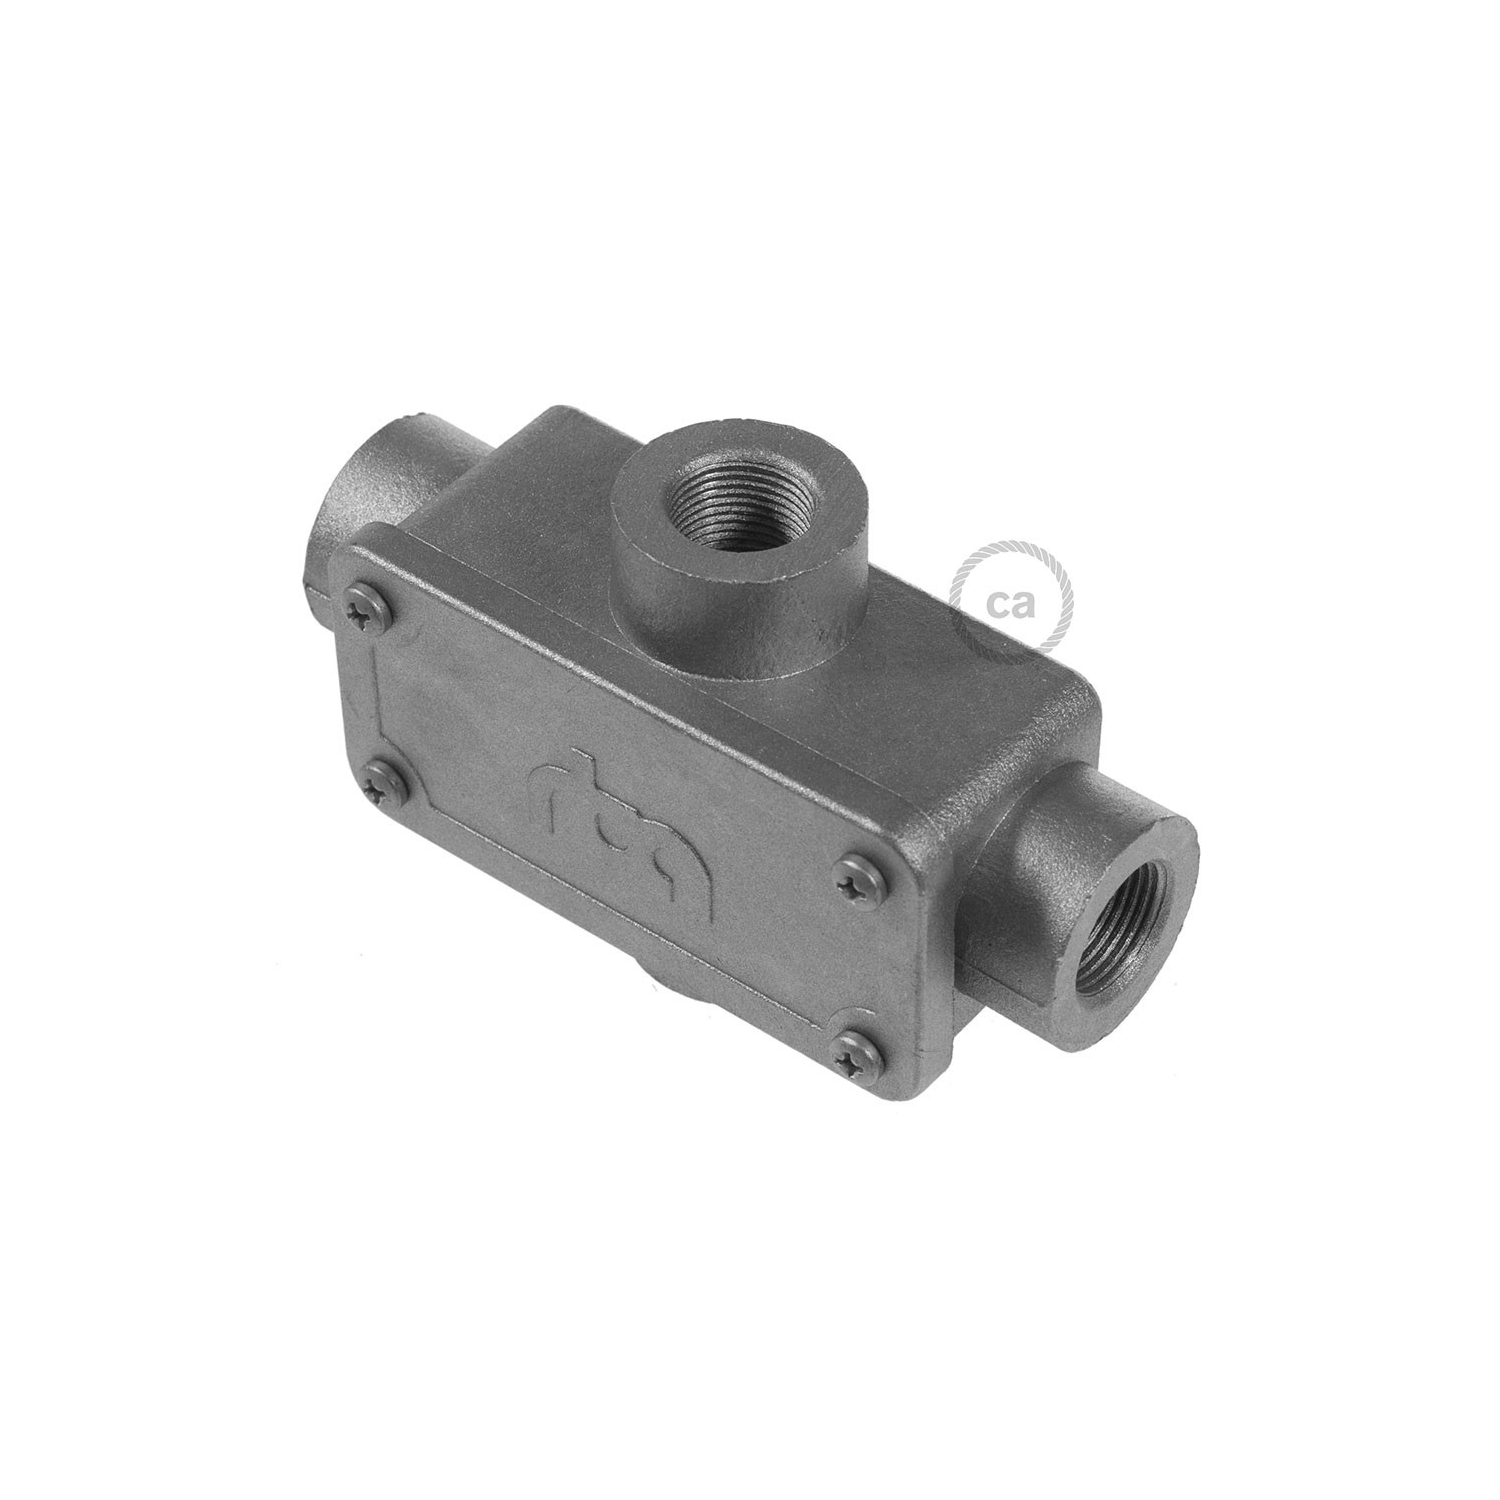 Four-outlet, X-shaped Junction box for Creative-Tube, aluminium case